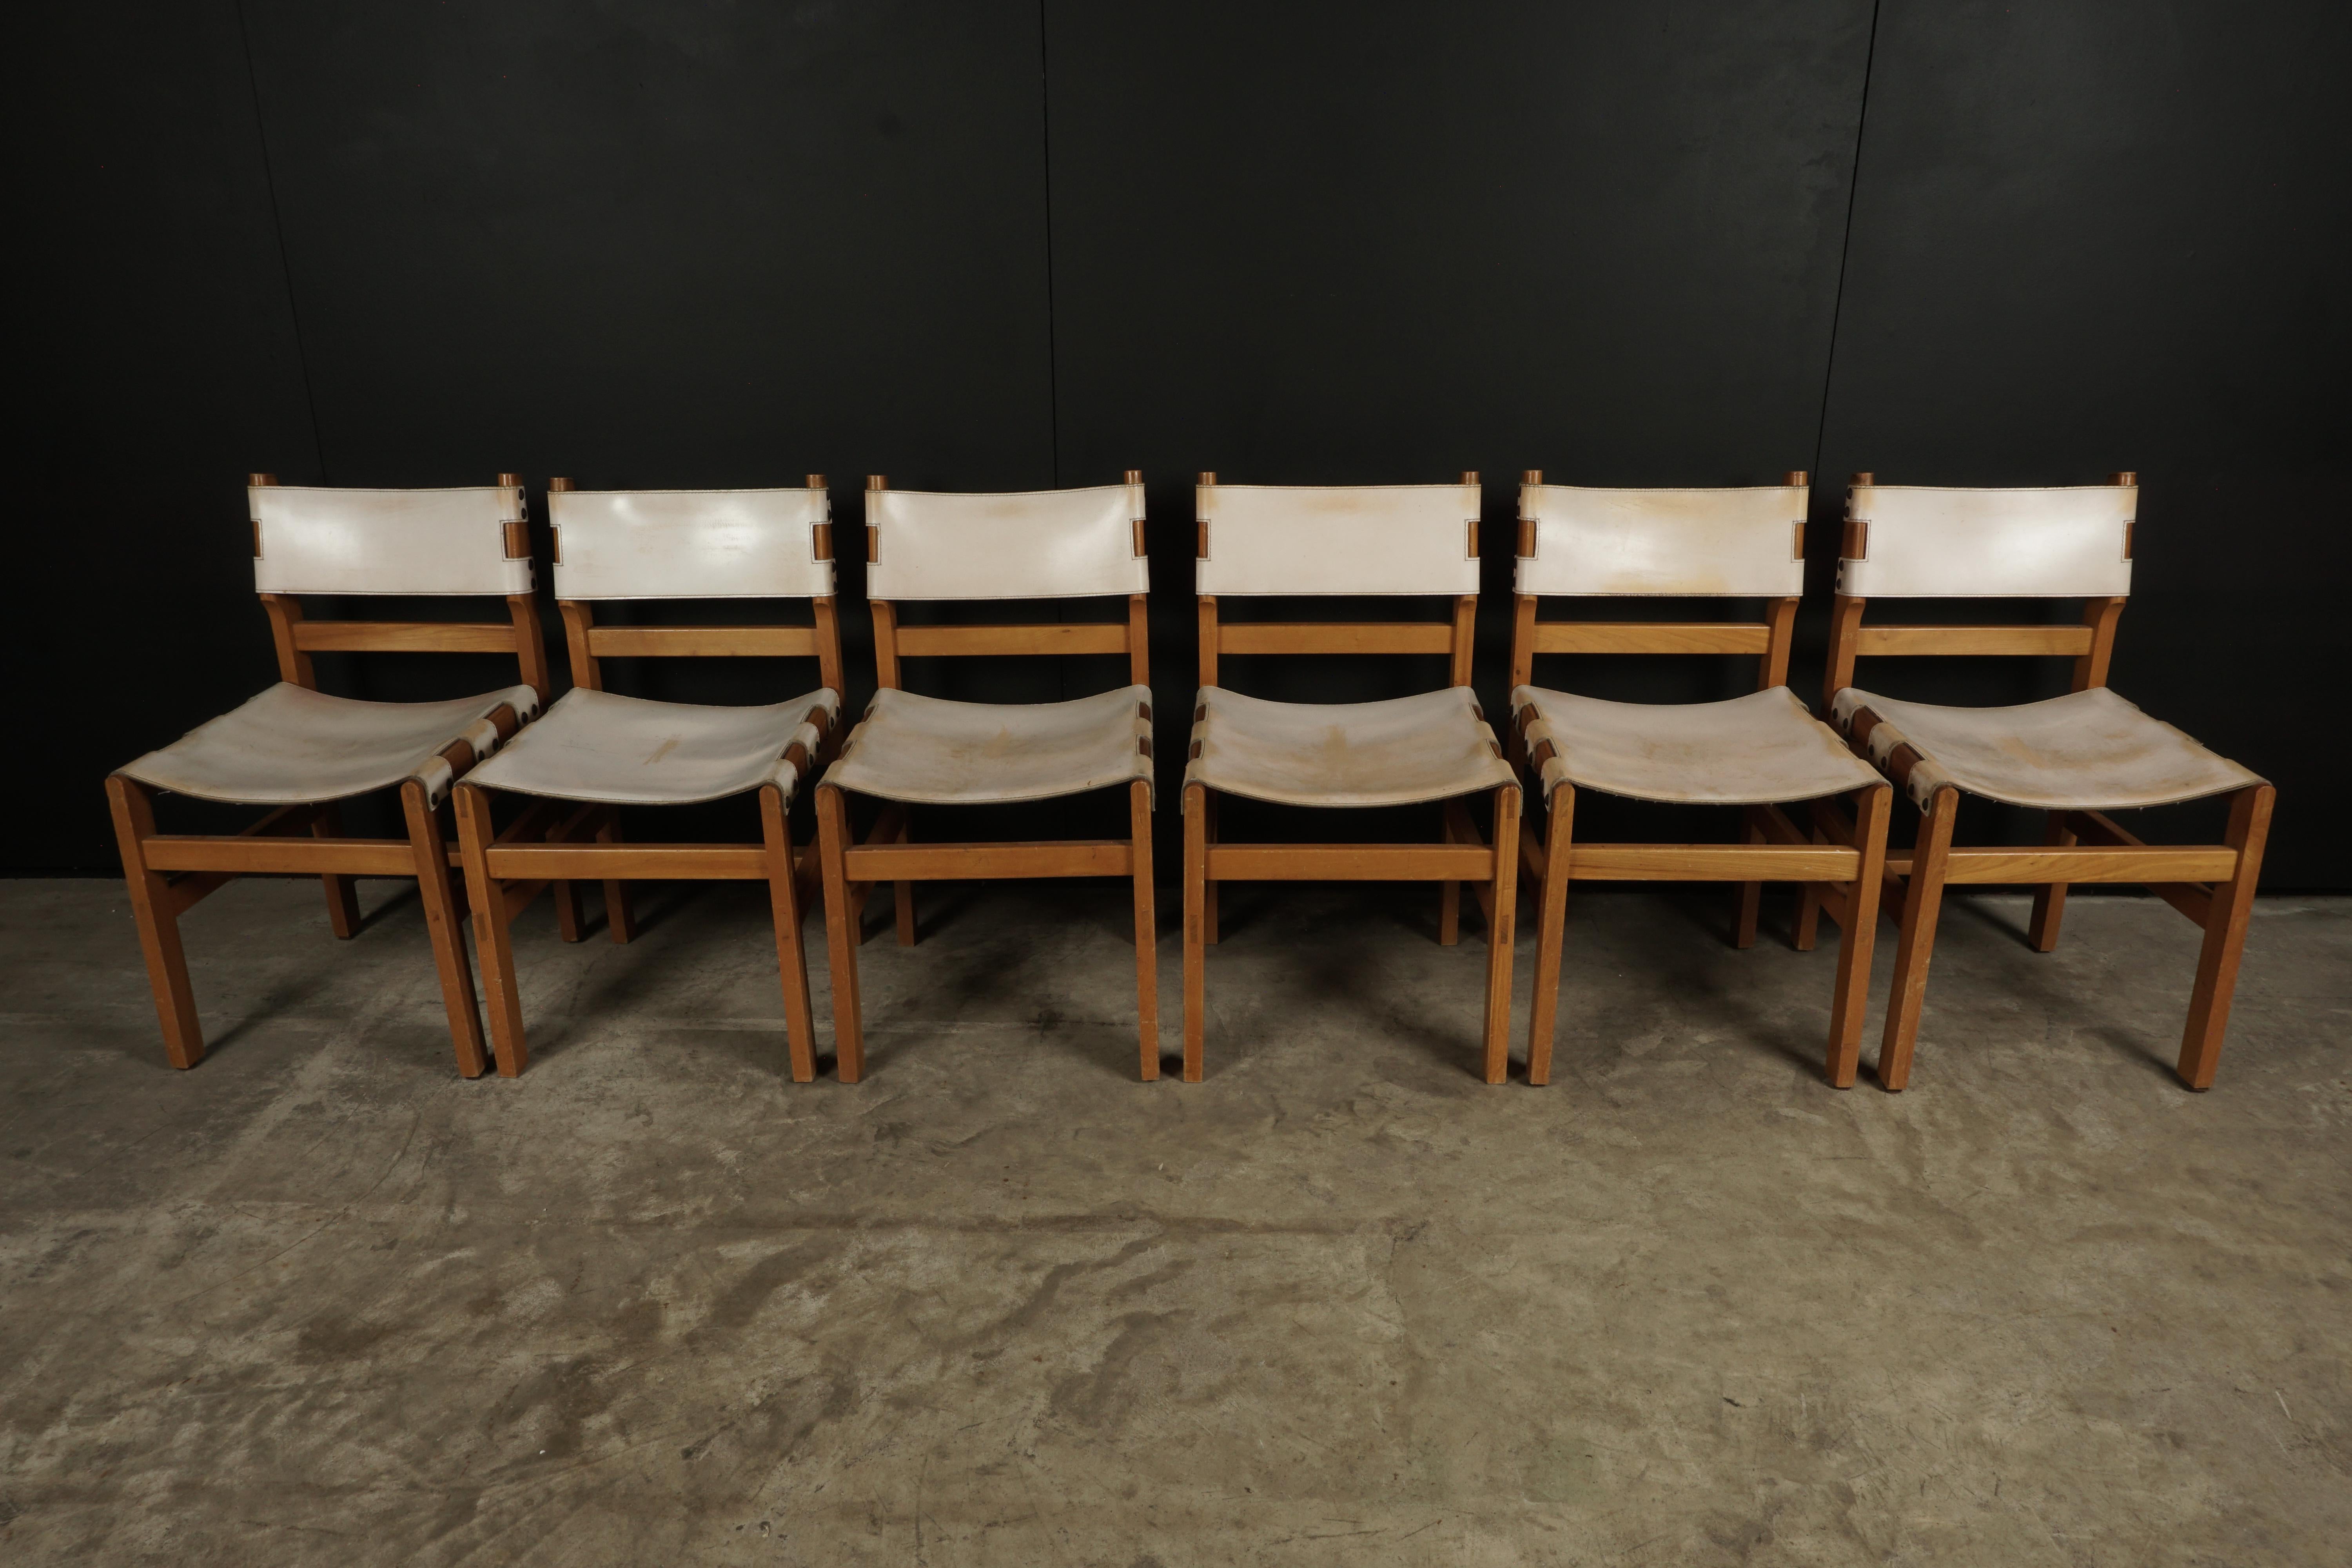 Vintage set of six leather dining chairs from France, 1970s. Off-white colored leather with great patina on a solid elm frame.